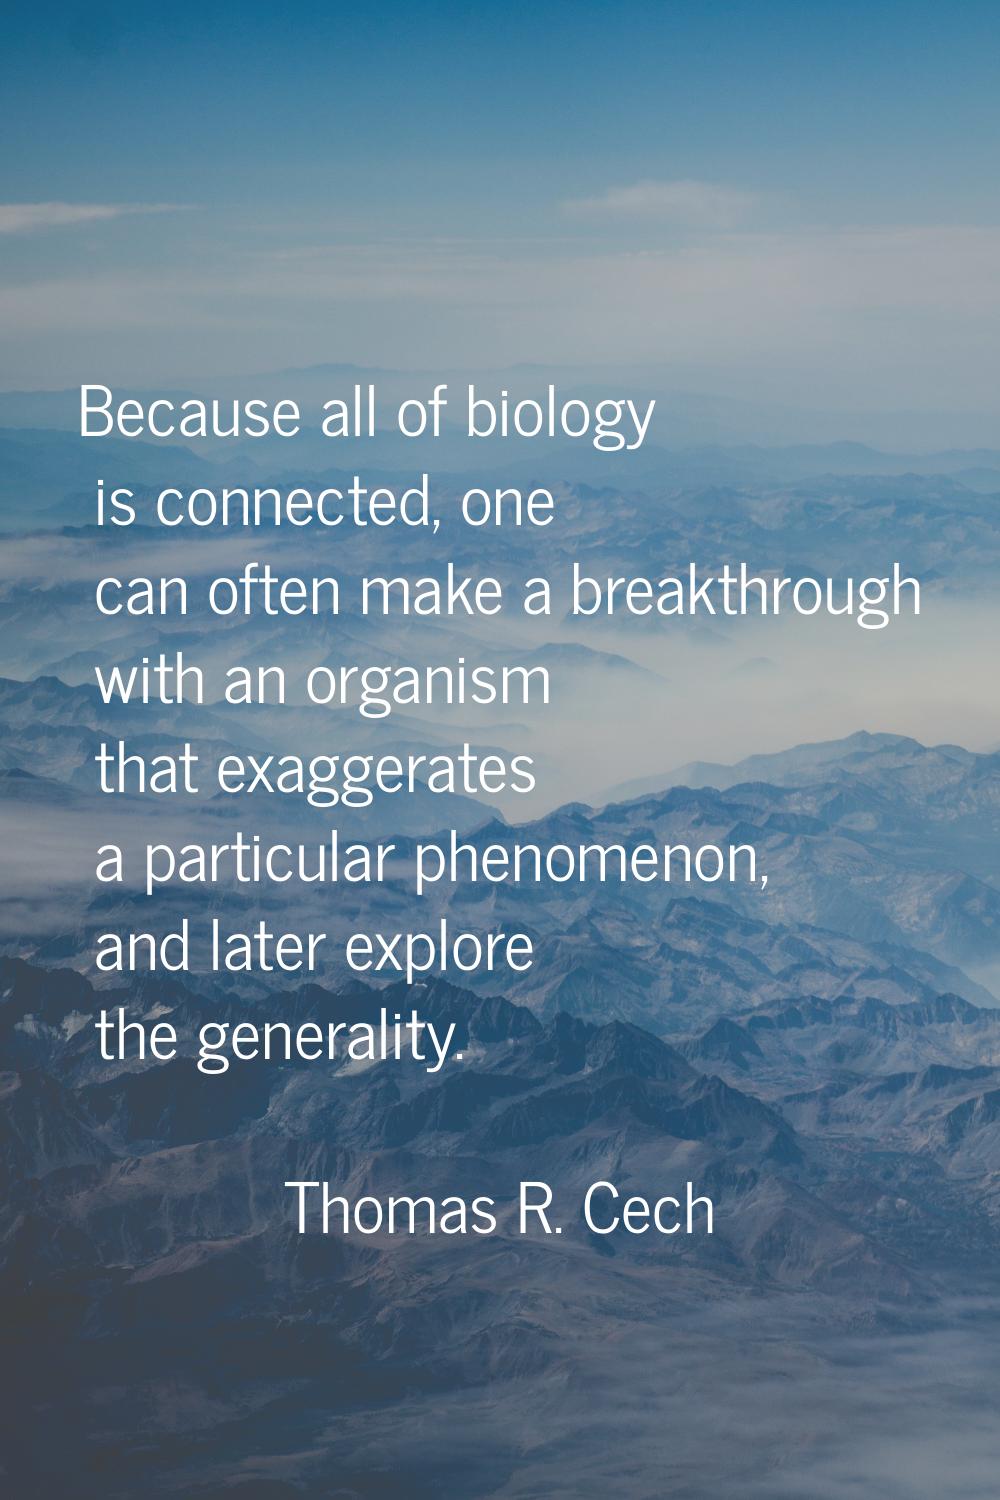 Because all of biology is connected, one can often make a breakthrough with an organism that exagge